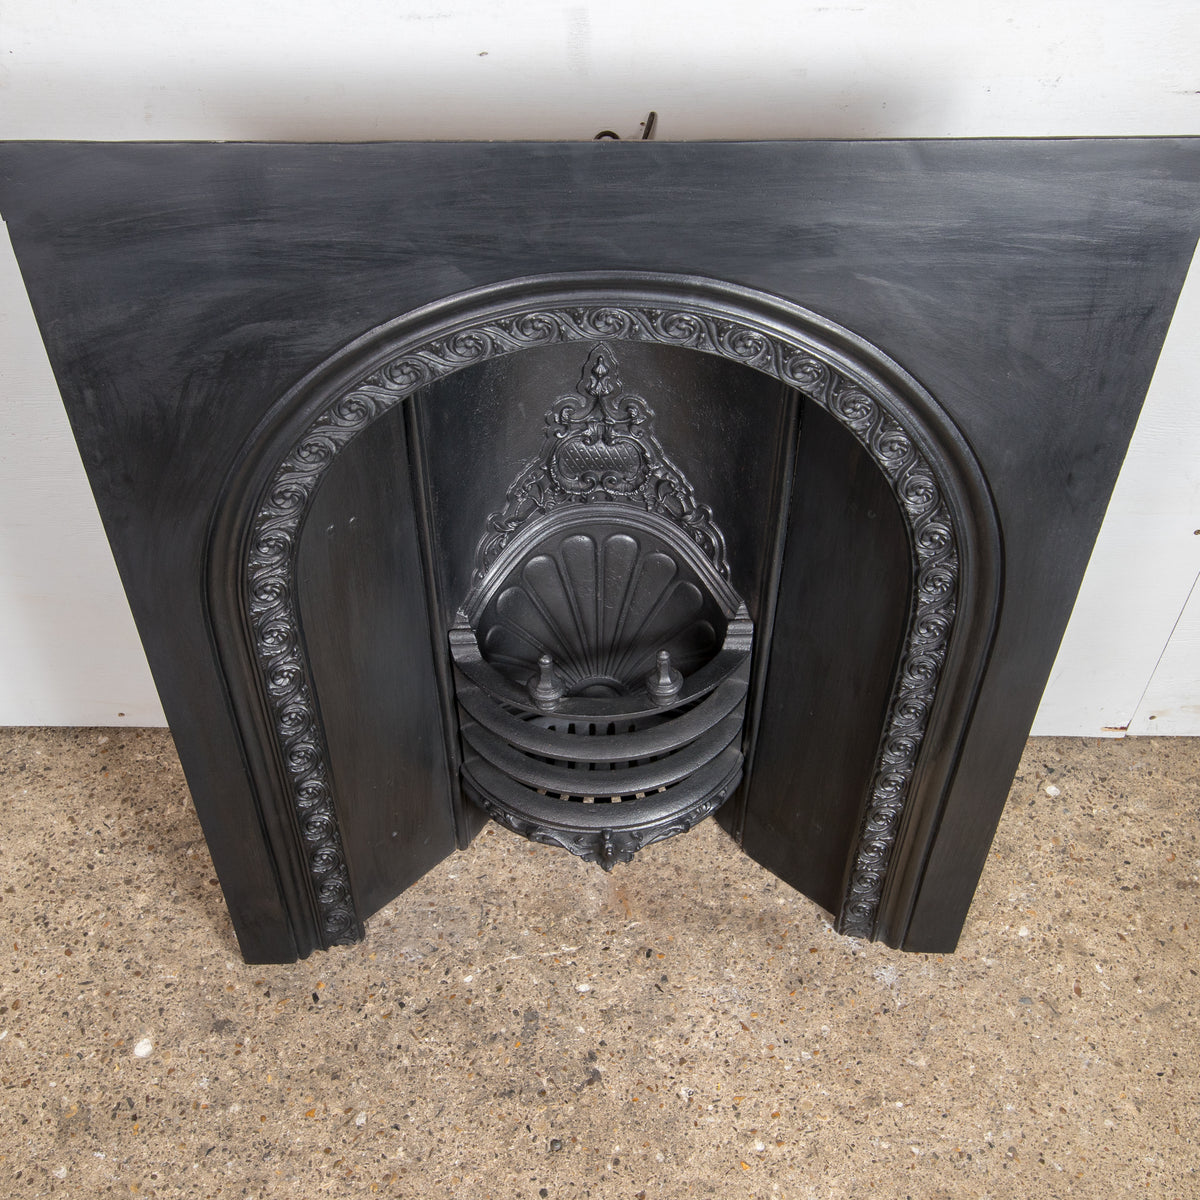 Antique Early Victorian Cast Iron Insert | The Architectural Forum